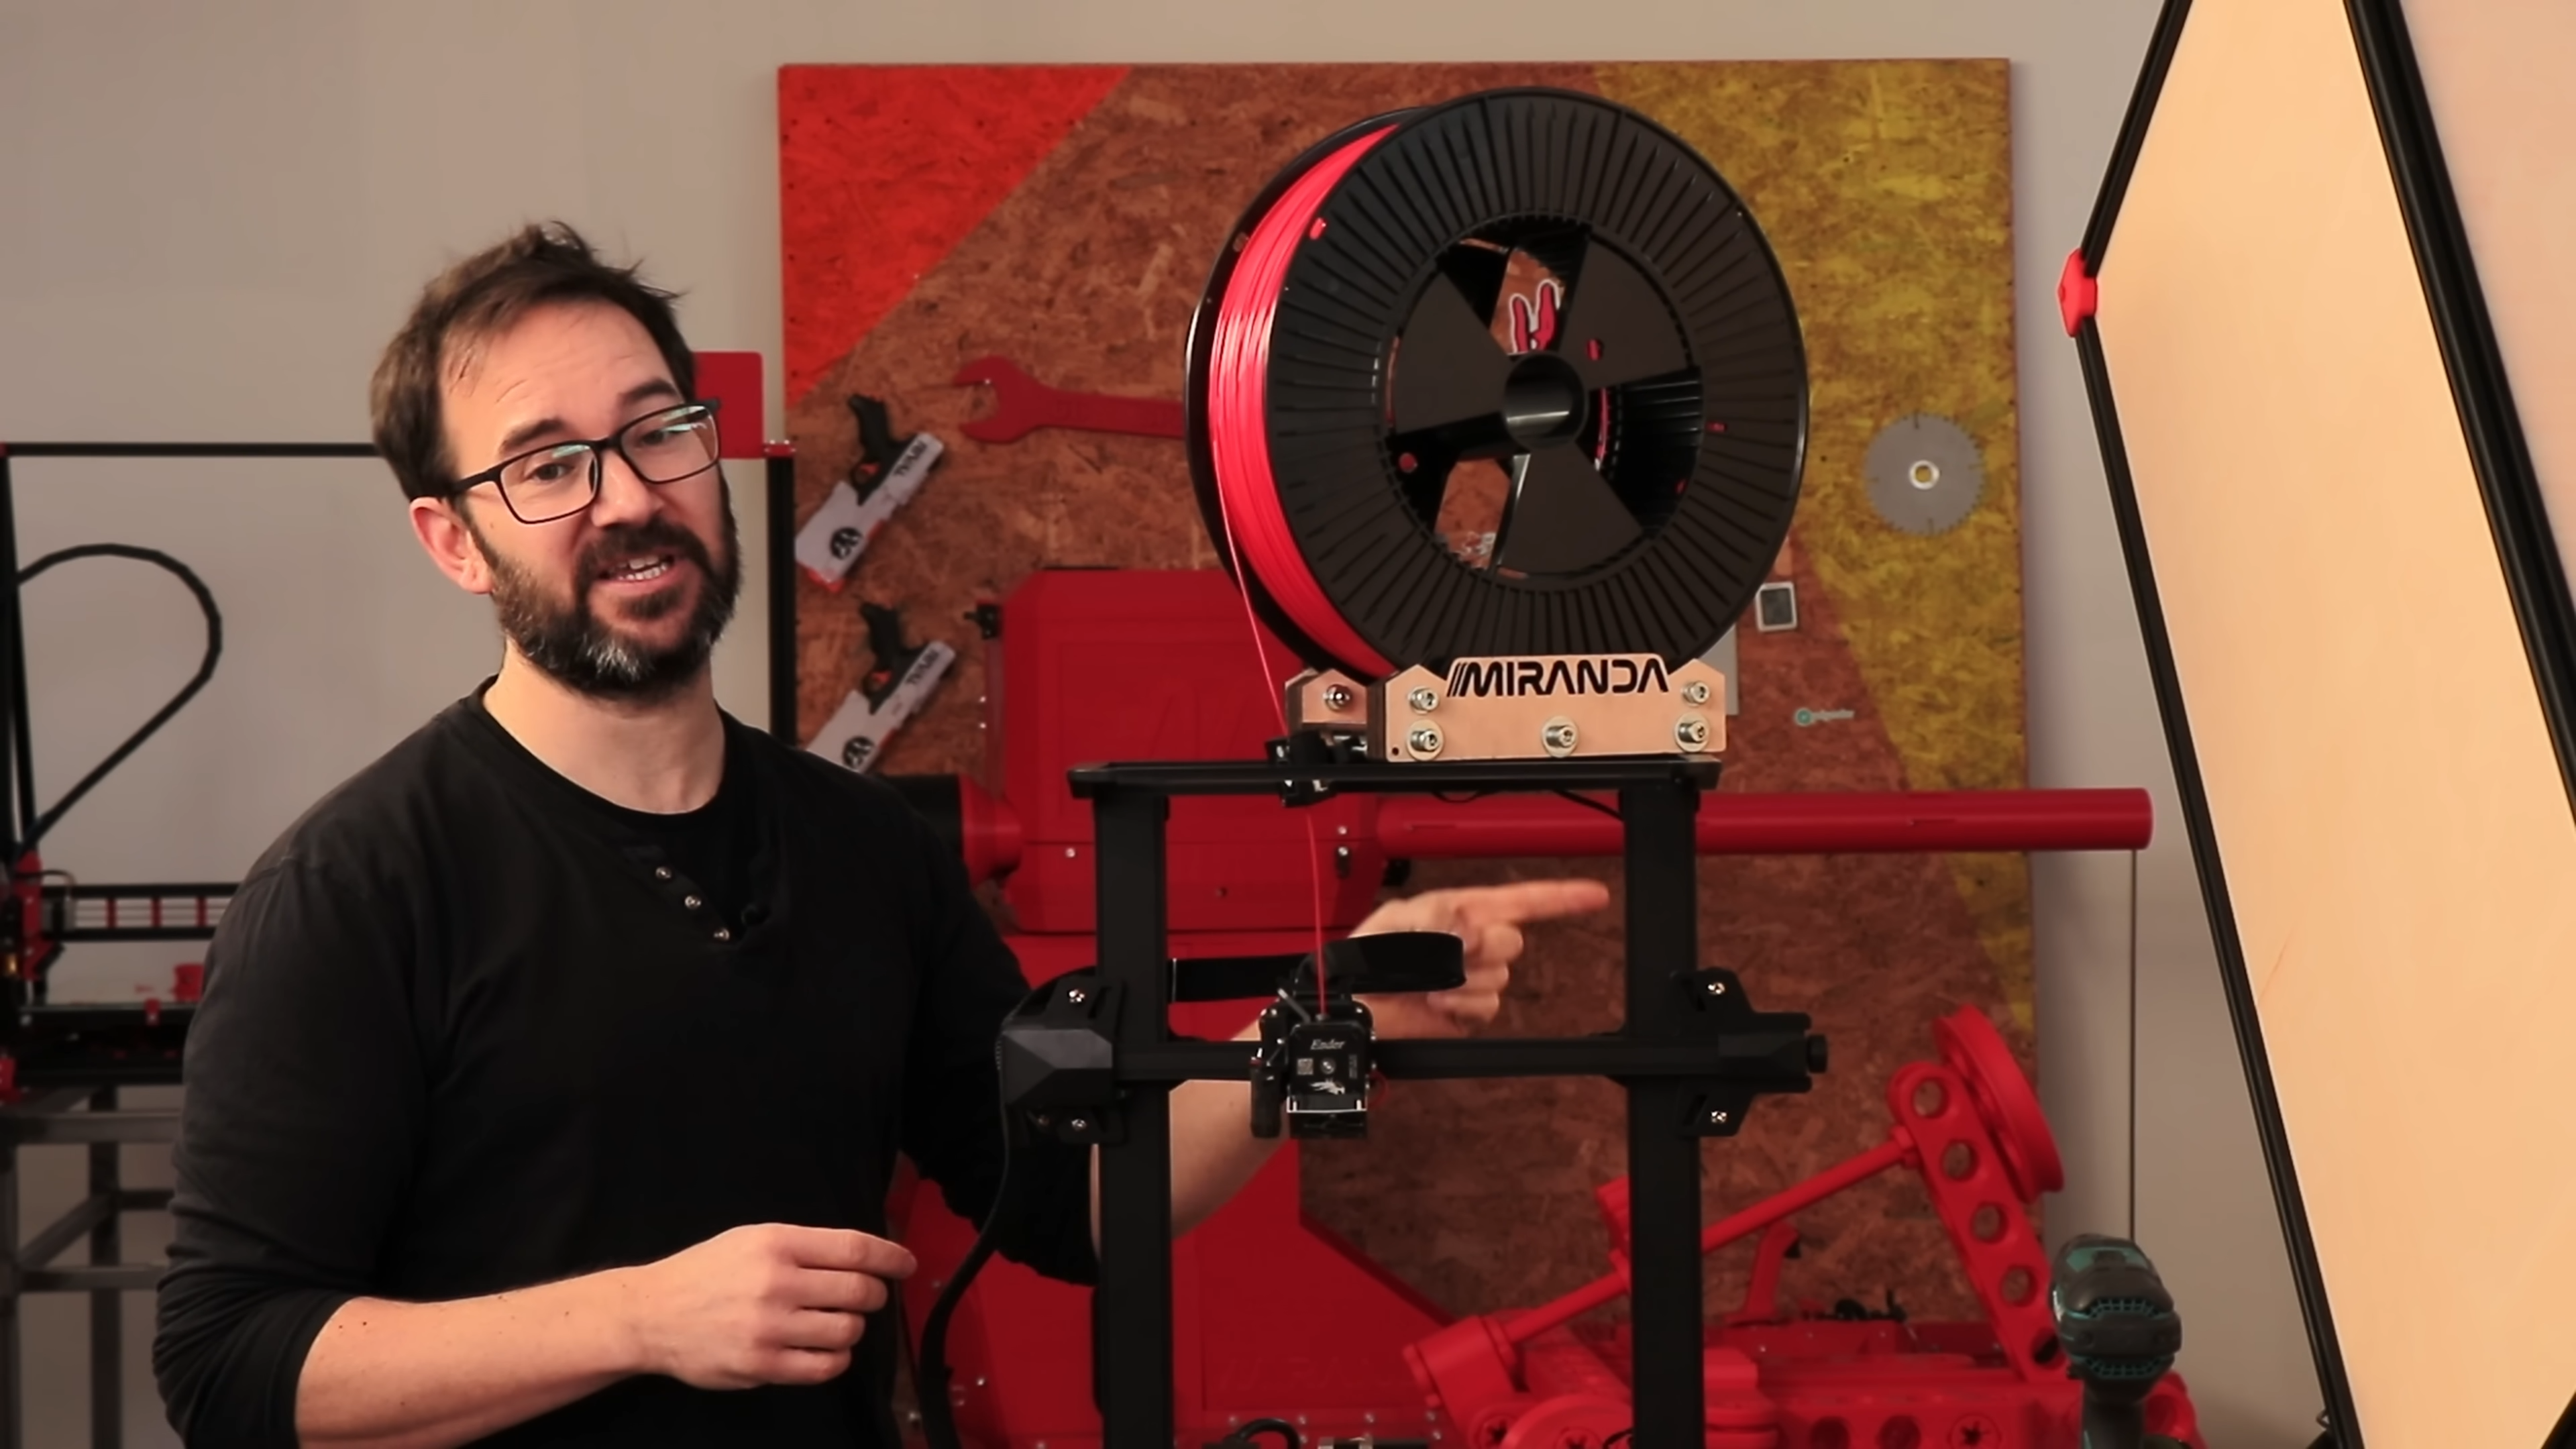 3D Printer Spool Roller Is Built For Giant Spools of Filament